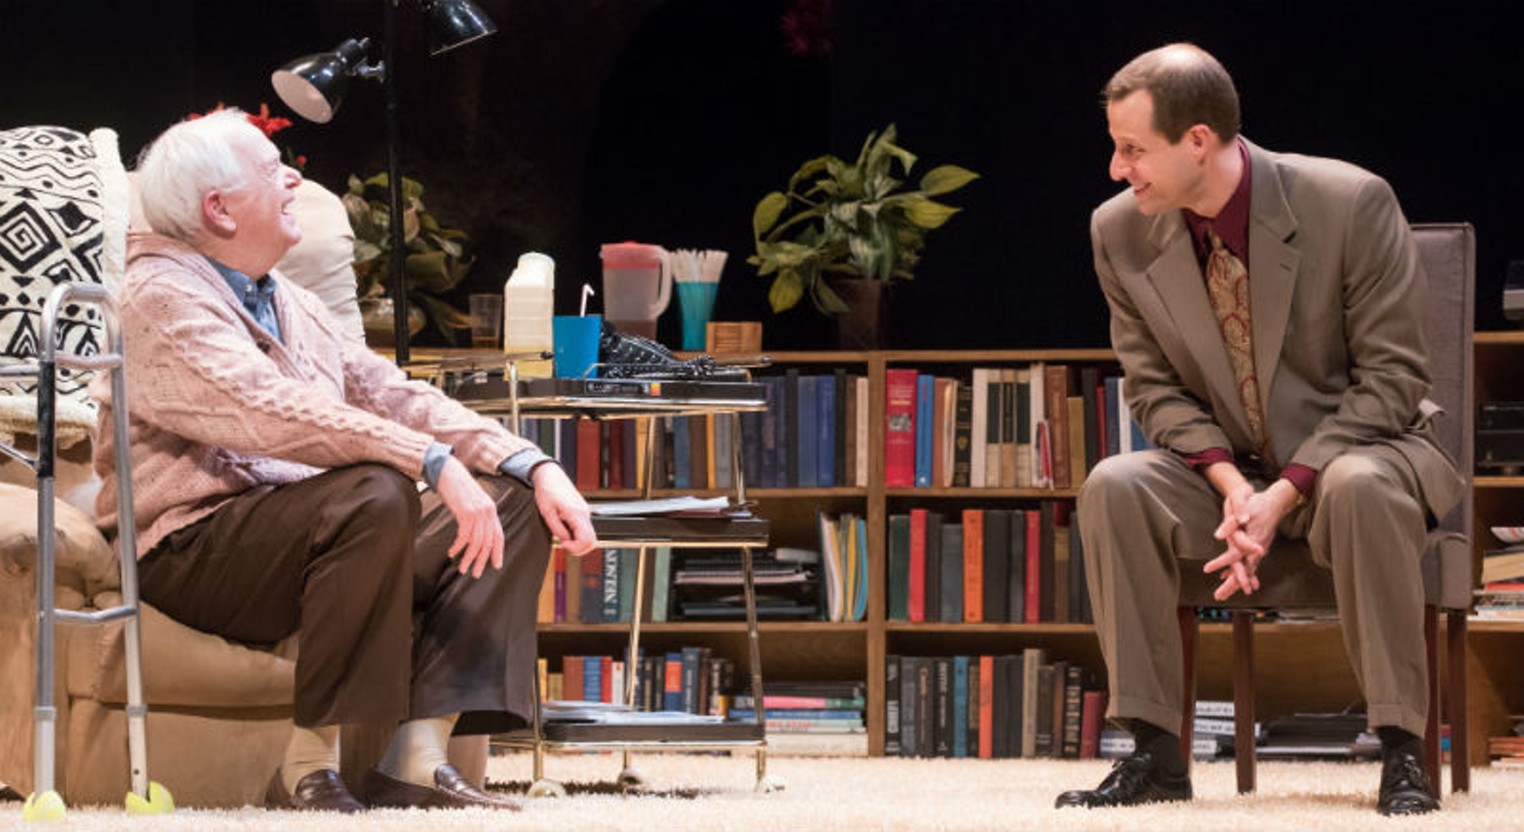 25 years after book, 'Tuesdays with Morrie' makes Mich. stage debut